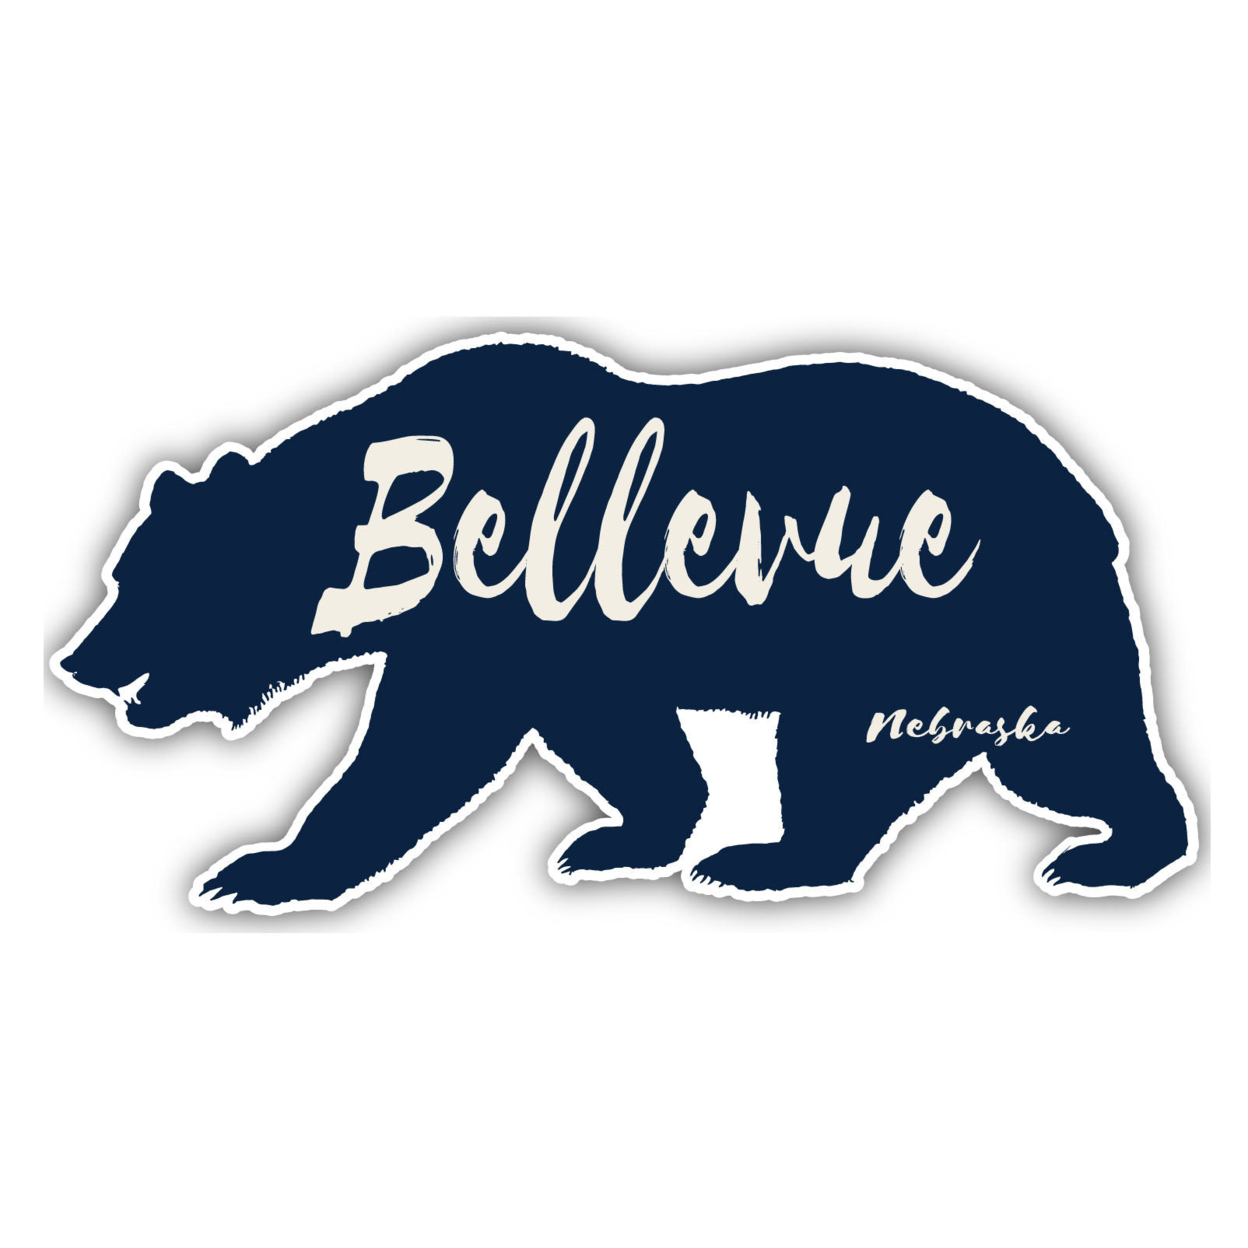 Bellevue Nebraska Souvenir Decorative Stickers (Choose Theme And Size) - 4-Pack, 8-Inch, Great Outdoors